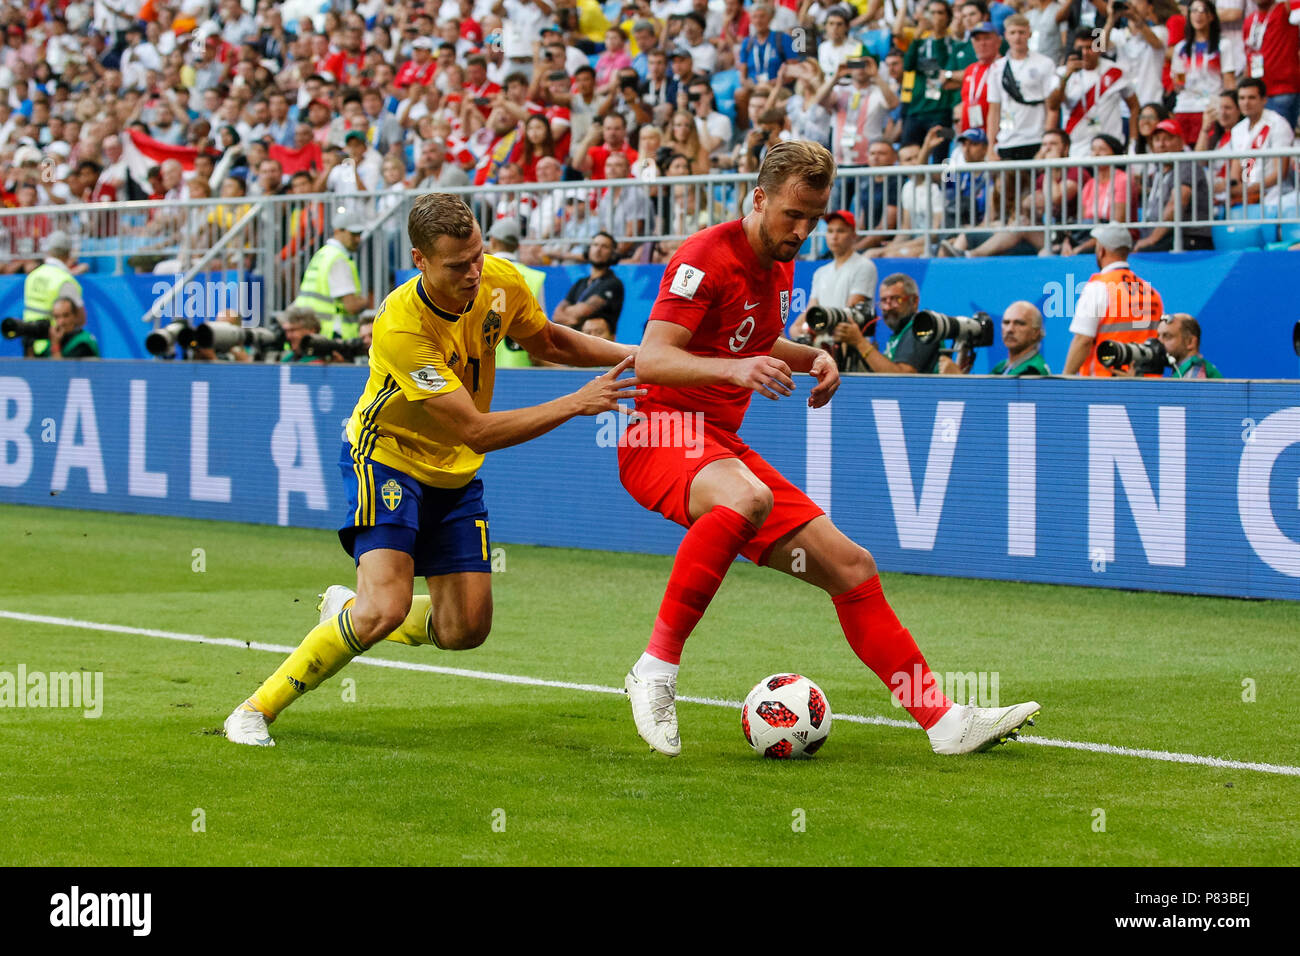 Samara, Russia. 7th July, 2018. Viktor Claesson of Sweden and Harry Kane of England during the 2018 FIFA World Cup Quarter Final match between Sweden and England at Samara Arena on July 7th 2018 in Samara, Russia. (Photo by Daniel Chesterton/phcimages.com) Credit: PHC Images/Alamy Live News Stock Photo